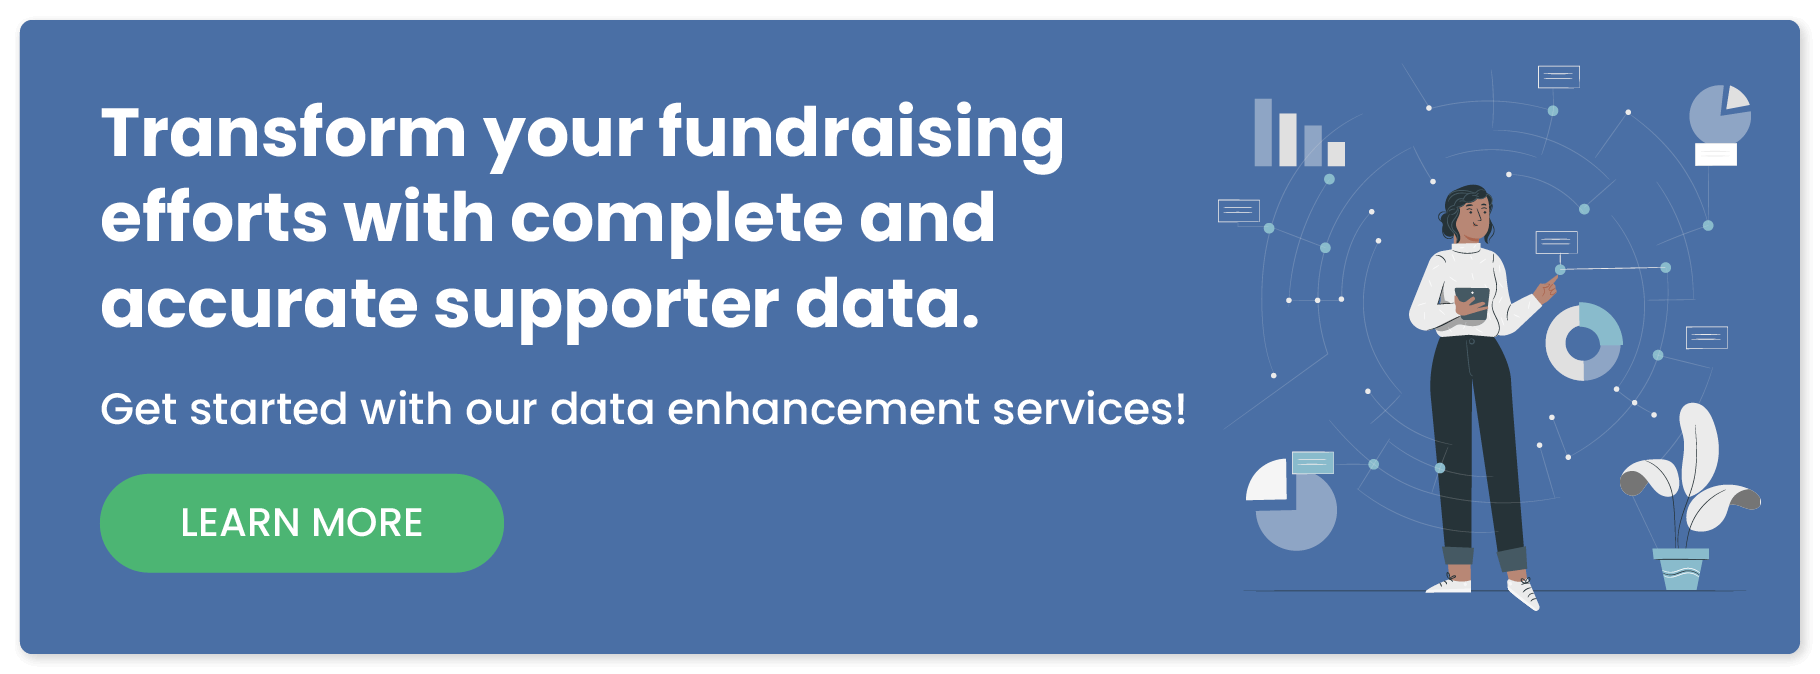 Learn more about our data enhancement services, including date of birth appending.